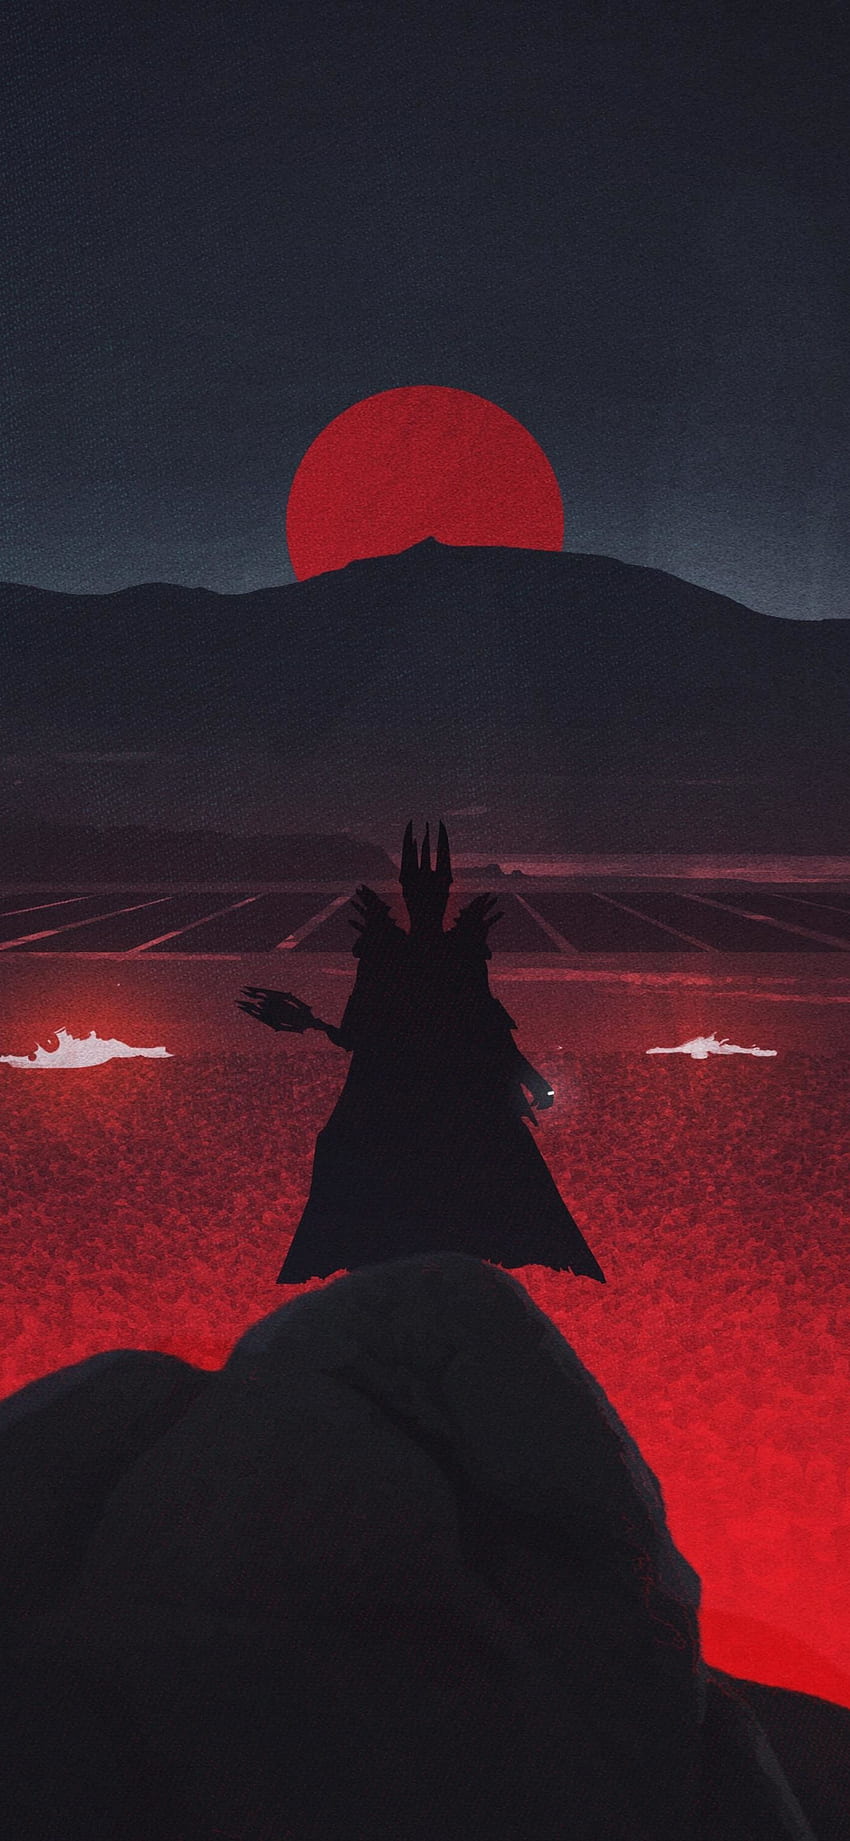 Dark King, Lords Of The Rings, Minimal, Art, - Lord Of The Rings Background iPhone, Lotr Minimalist Papel de parede de celular HD